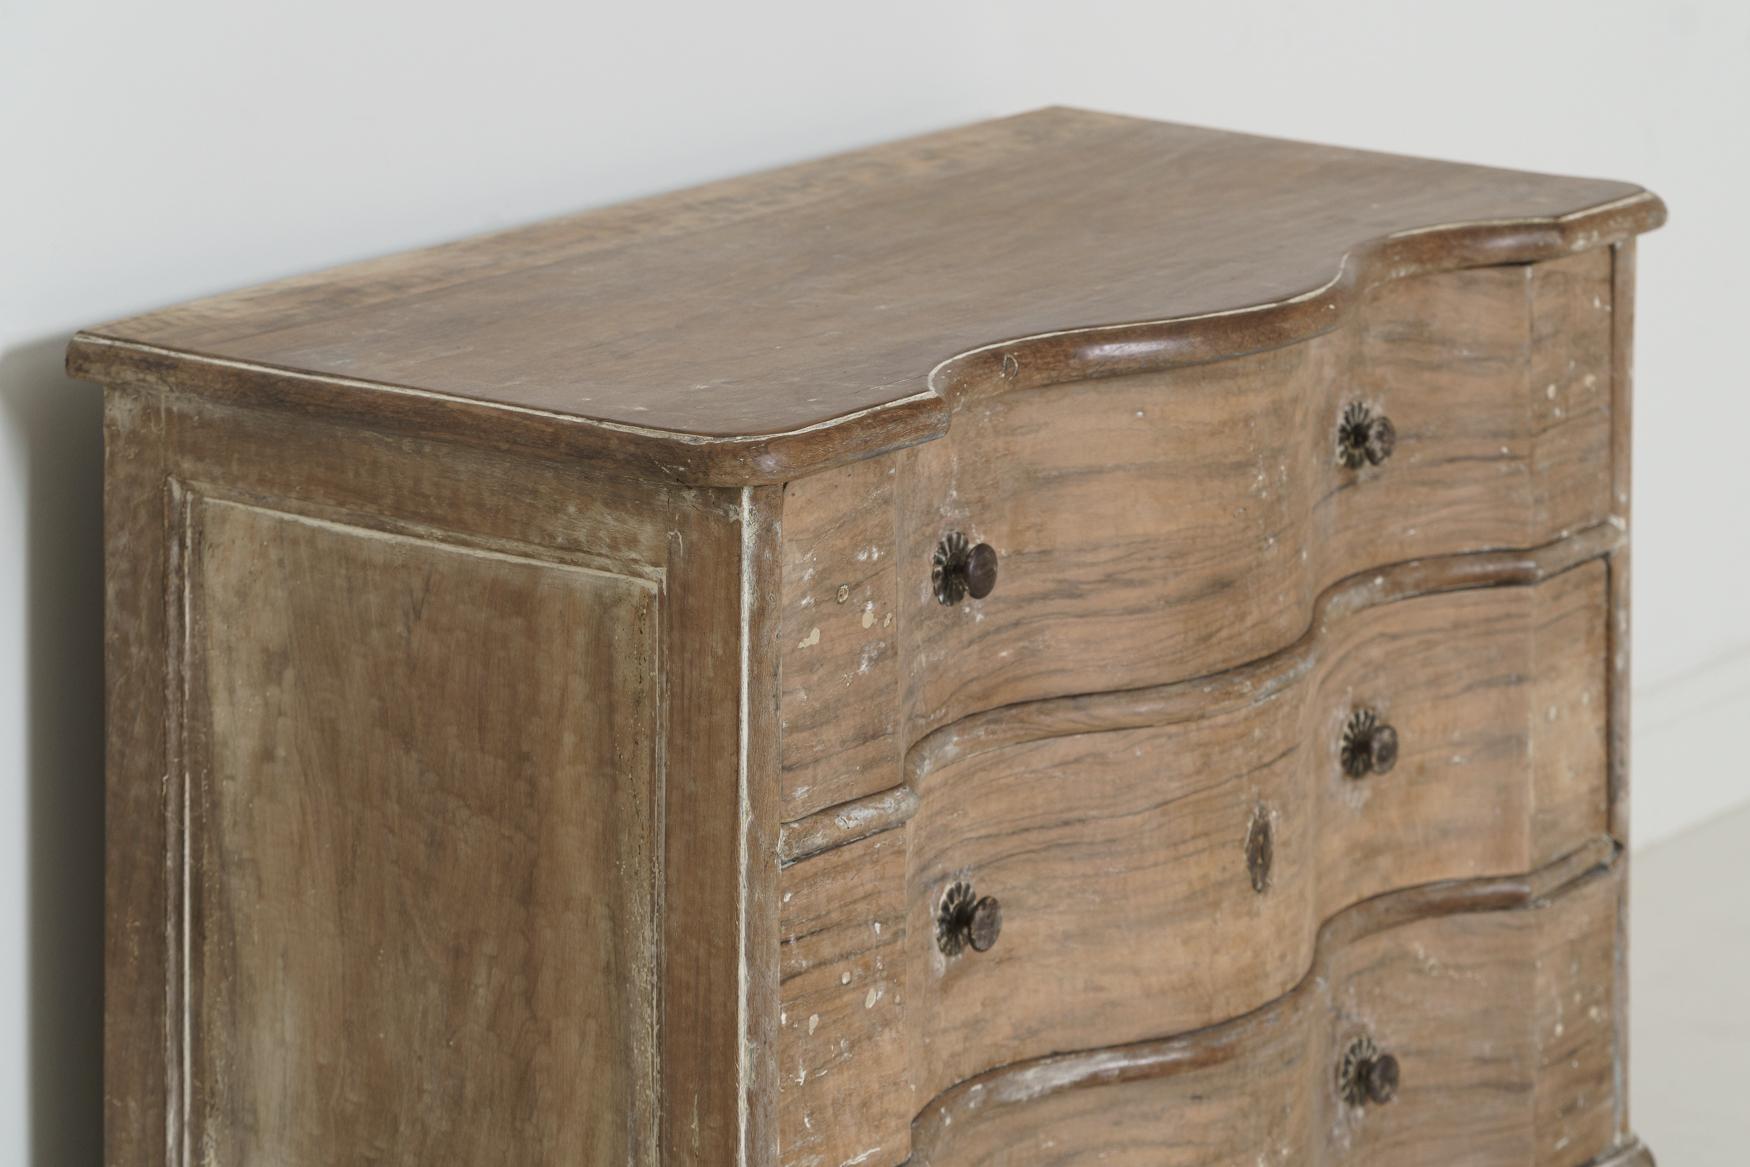 A beautiful chest of drawers with serpentine front, original hardware, bun feet, and raised, paneled sides. The patina is natural walnut with traces of original paint. Found in Provence, France.